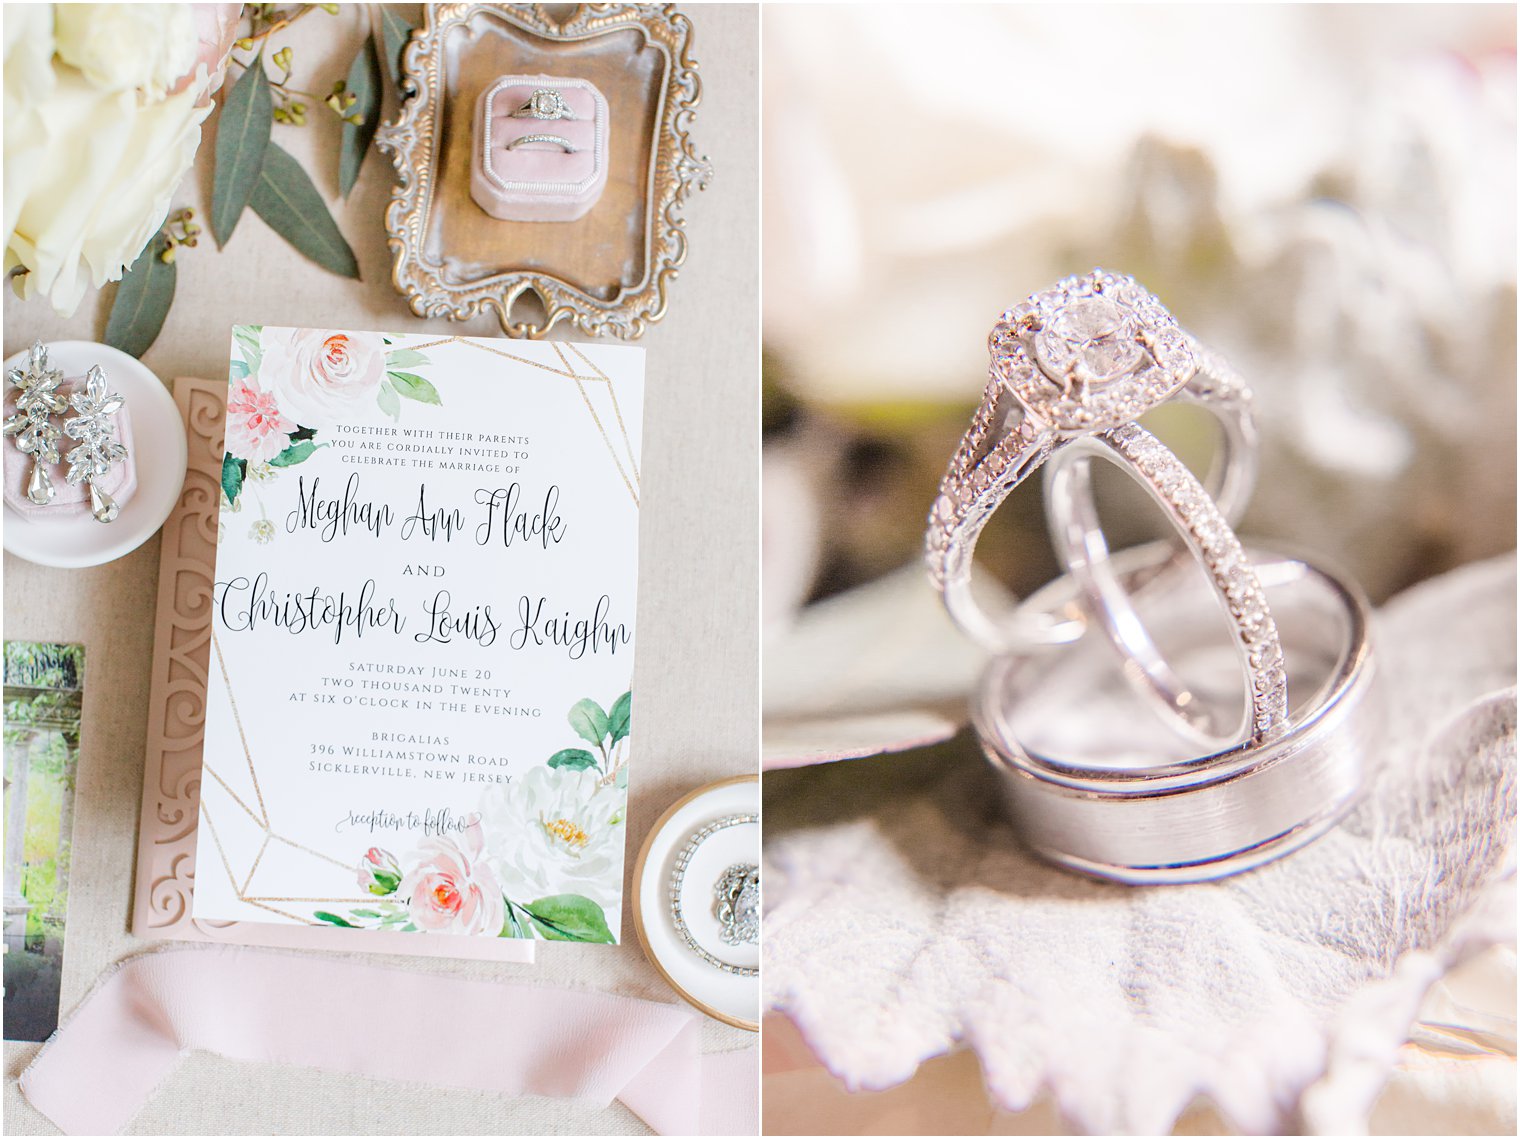 wedding bands rest on lace with wedding invite for Brigalias wedding 